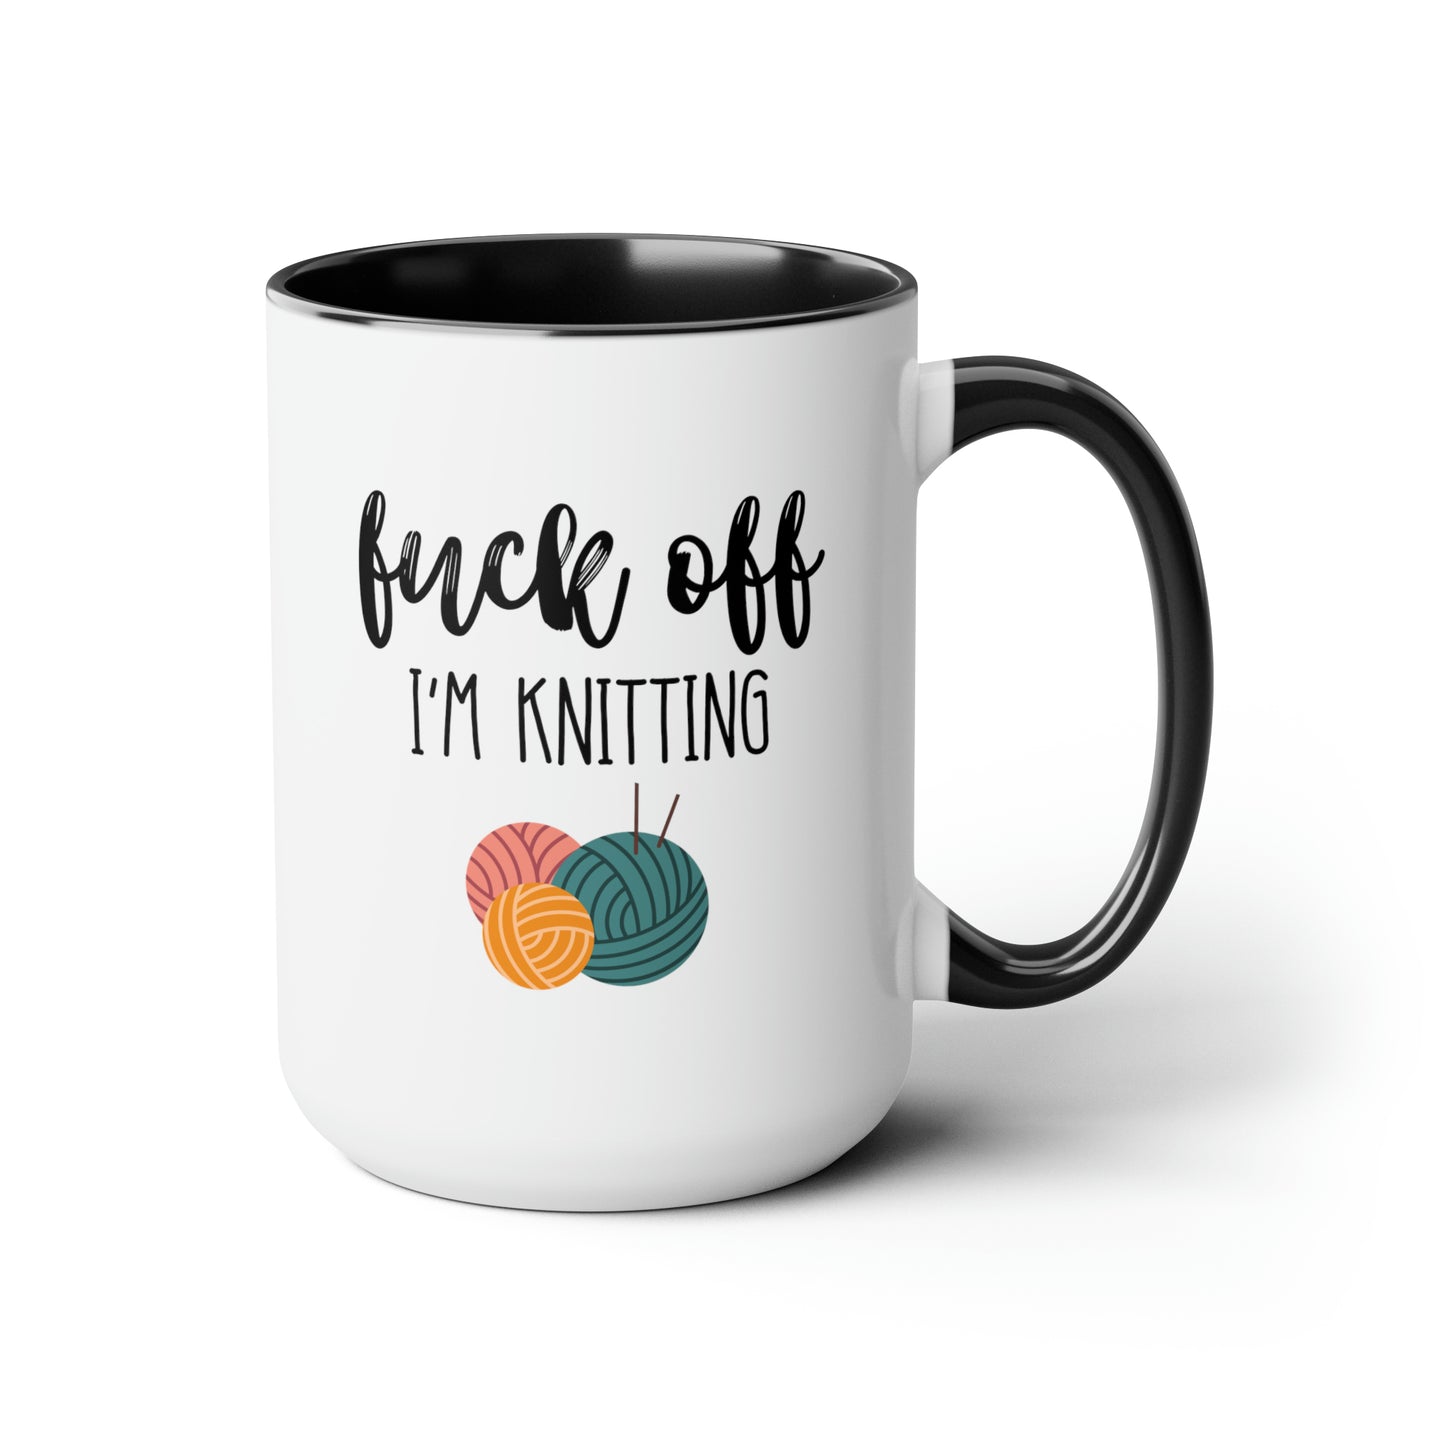 Fuck Off I'm Knitting 15oz white with black accent funny large coffee mug gift for knitters knitting birthday mothers day knit yarn  waveywares wavey wares wavywares wavy wares